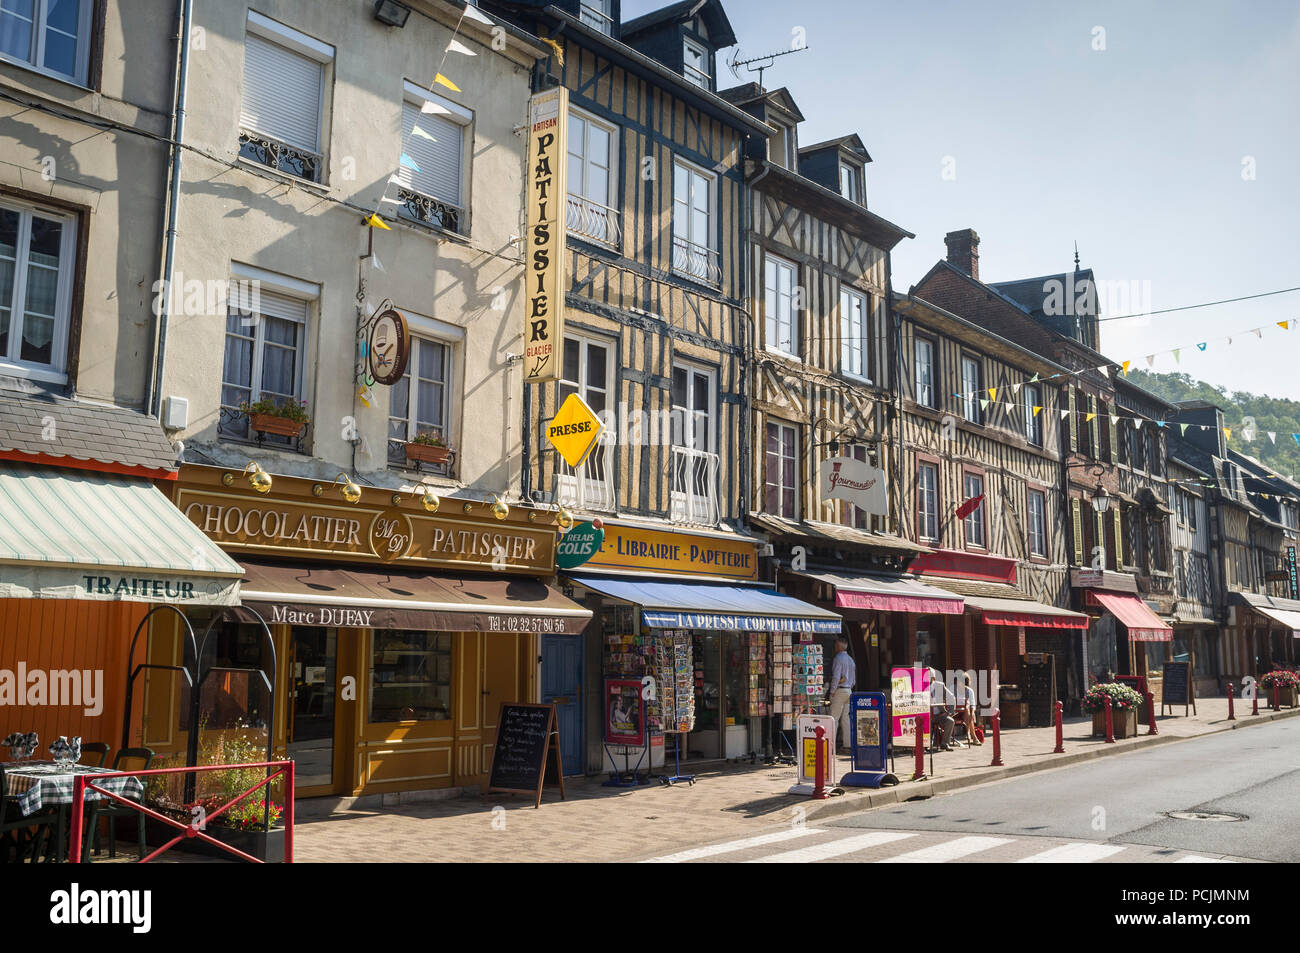 Street scene with ancient half-timbered shops the high street in Cormeilles, Normandy, France on a sunny day with clear blue sky Stock Photo